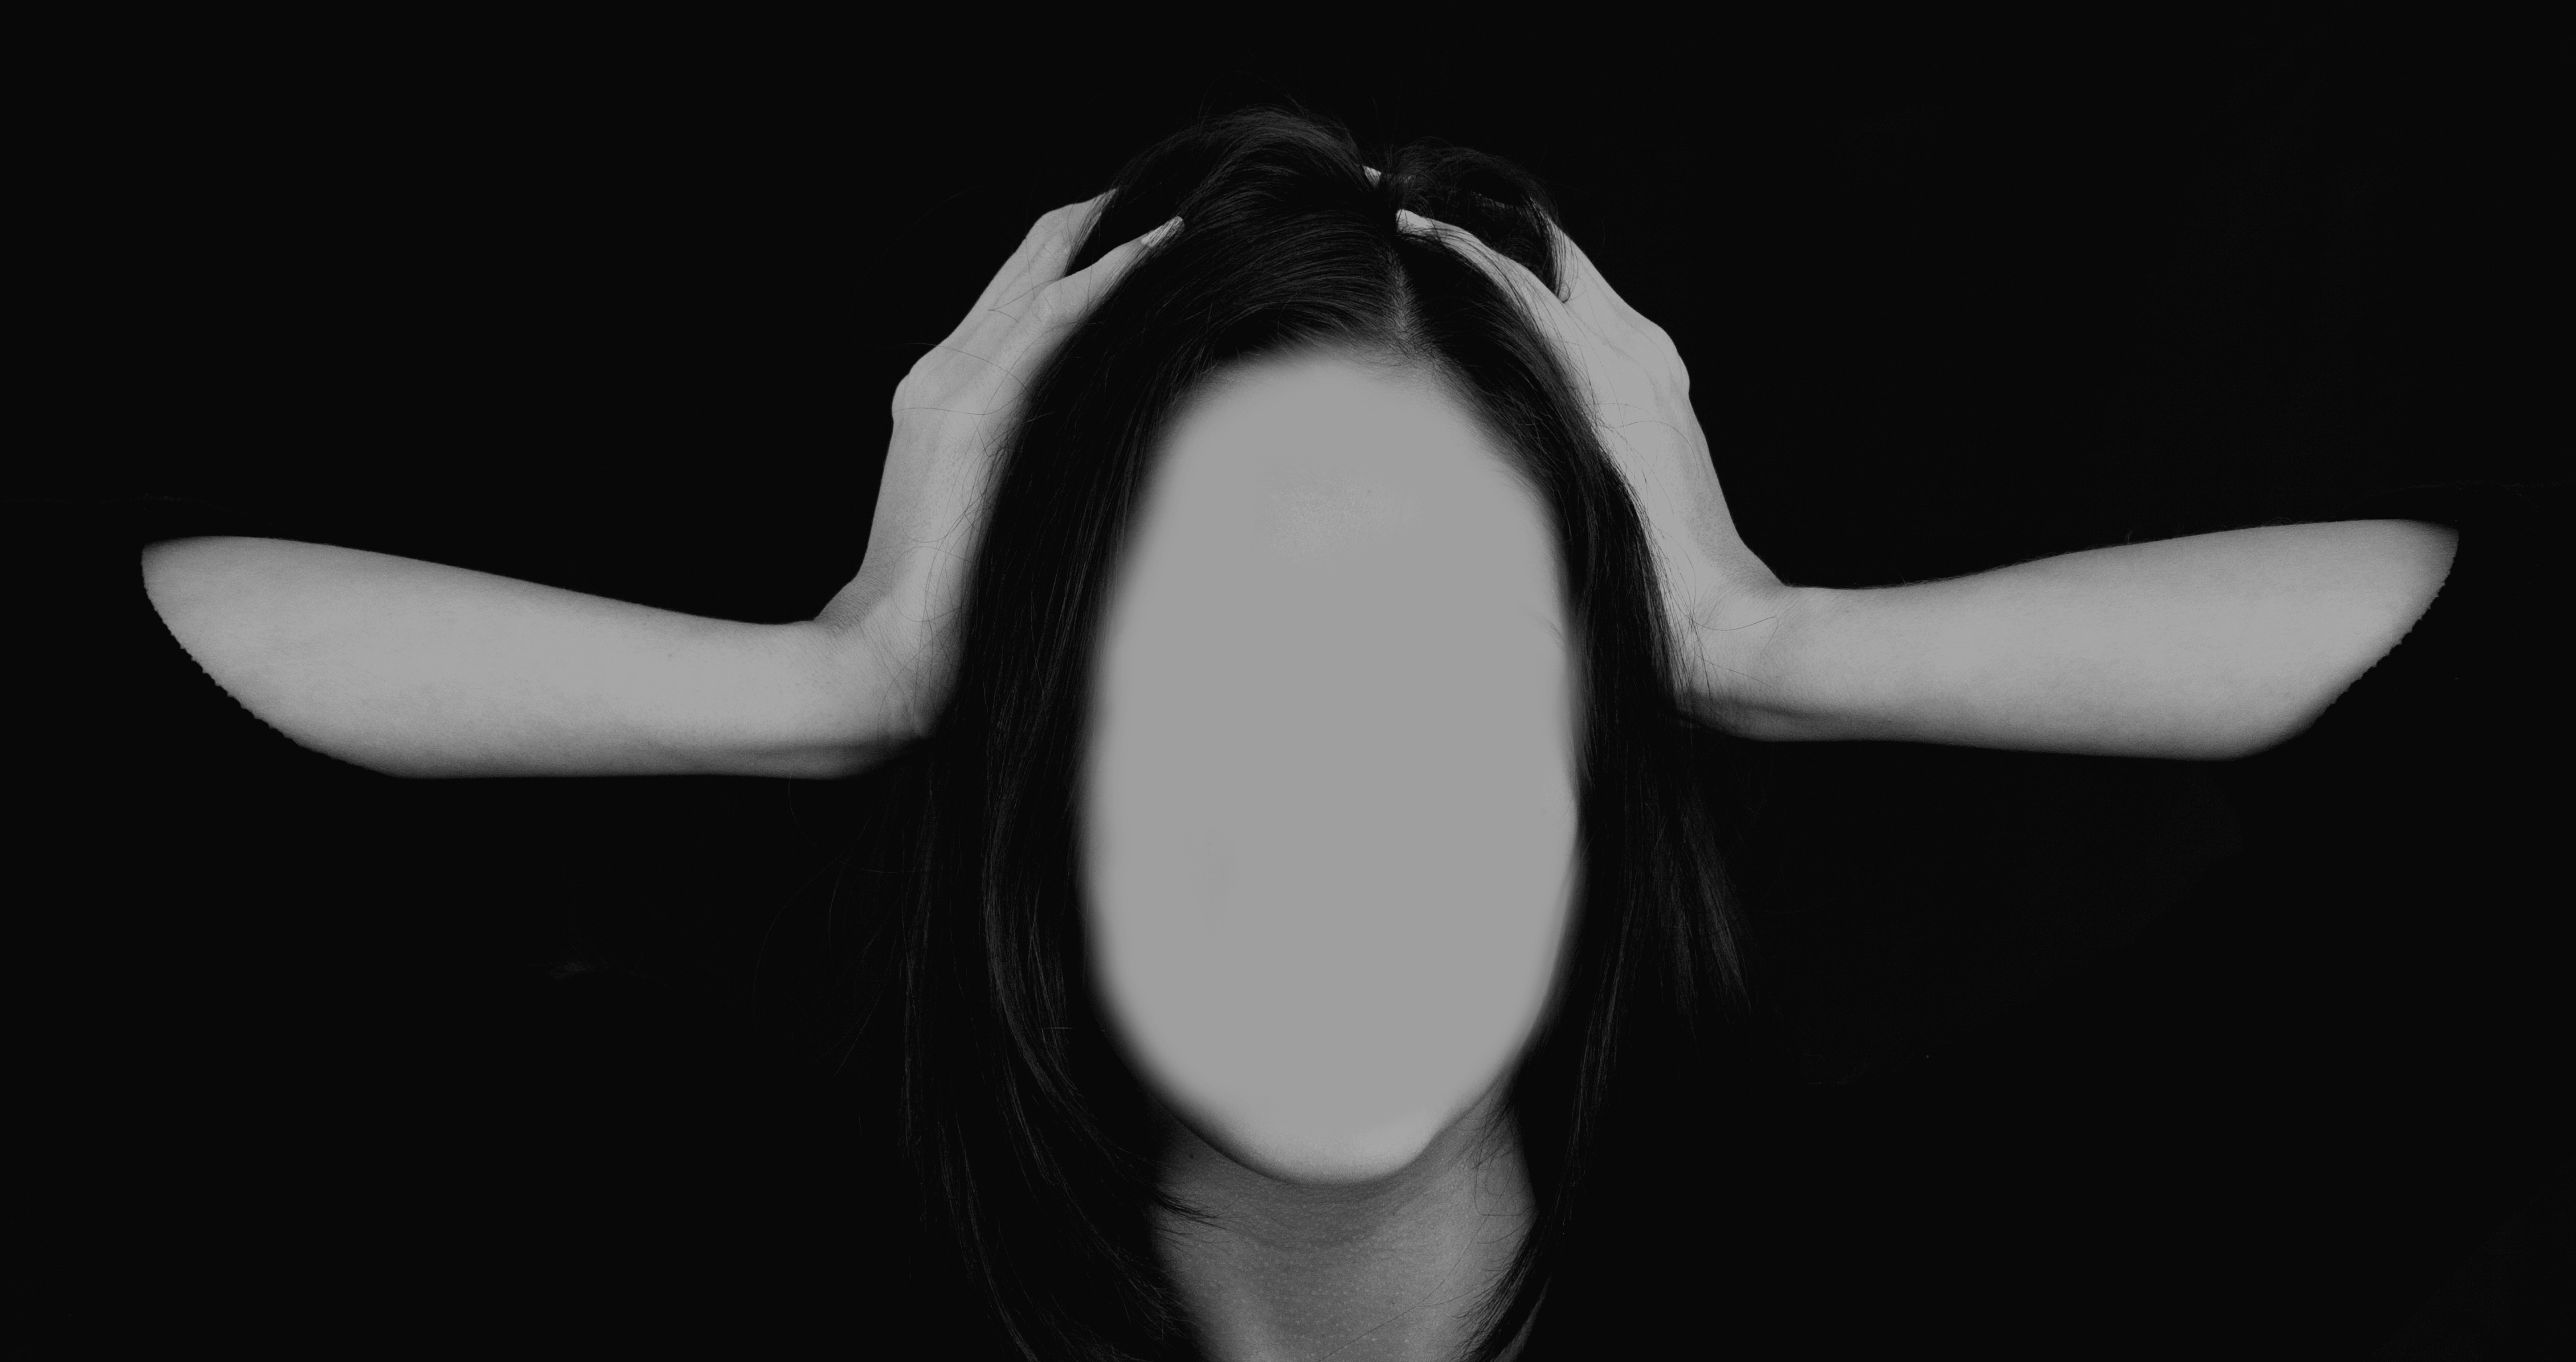 Faceless Female Head At Darkness Free Image Download